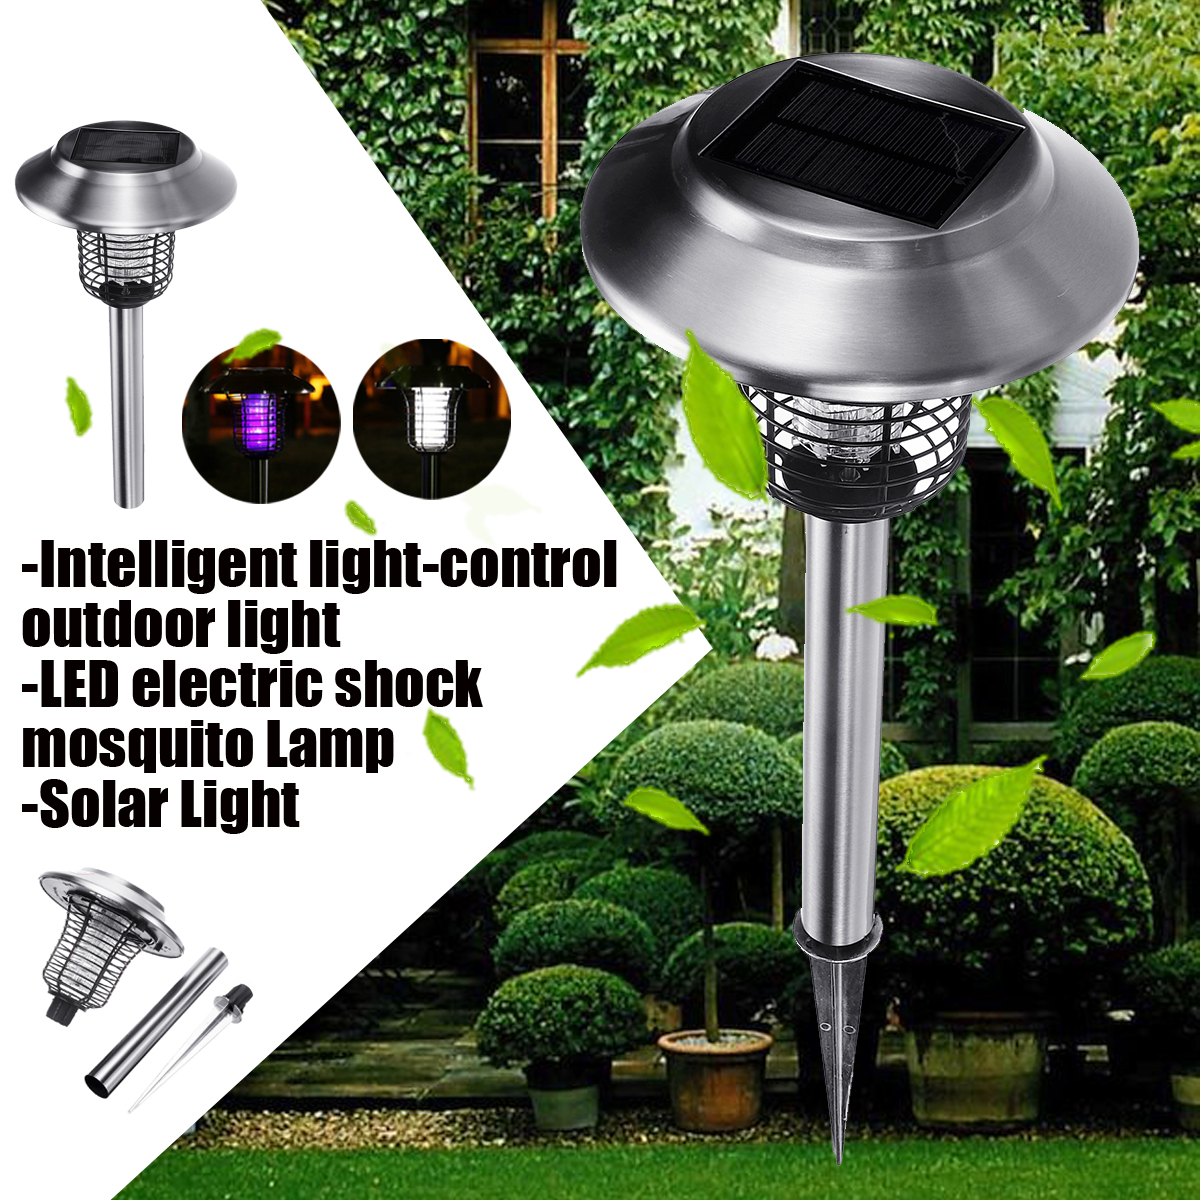 Solar-Electric-Shock-Mosquito-LED-Light-Fly-Bug-Insect-Zapper-Killer-Trap-Lamp-Intelligent-Light-con-1490338-7